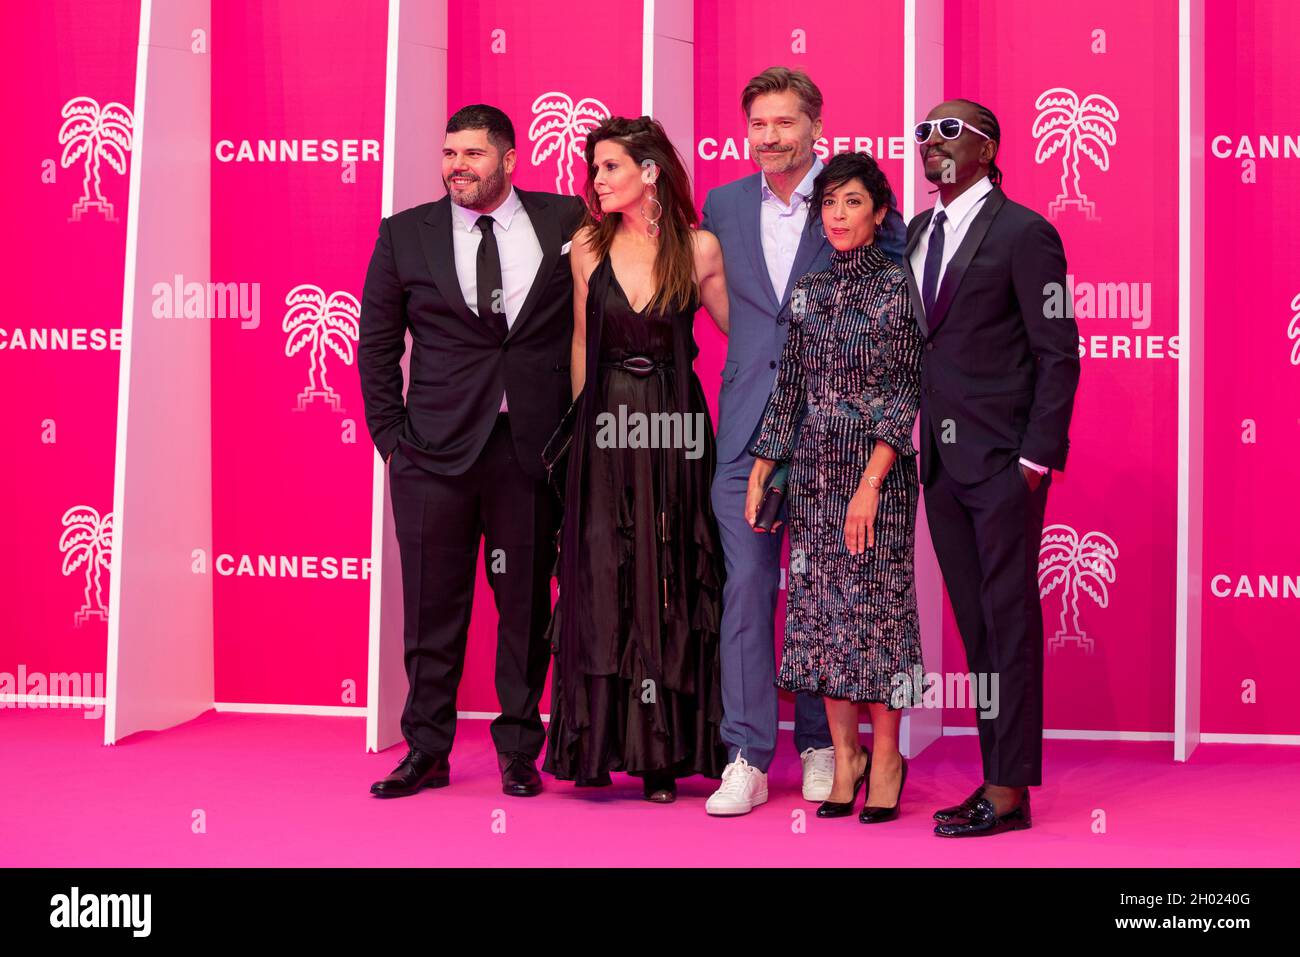 Cannes, France, 9 October 2021, JURY LONG FORM; MARCO PRINCE; NICOLAJ COSTER-WALDAU; SIGAL AVIN; SALVATORE ESPOSITO and NAIDRA AYADI are posing along the pink carpet during the Canneseries - International Series Festival at the Palais des Festivals in Cannes © ifnm press / Alamy Live News Stock Photo